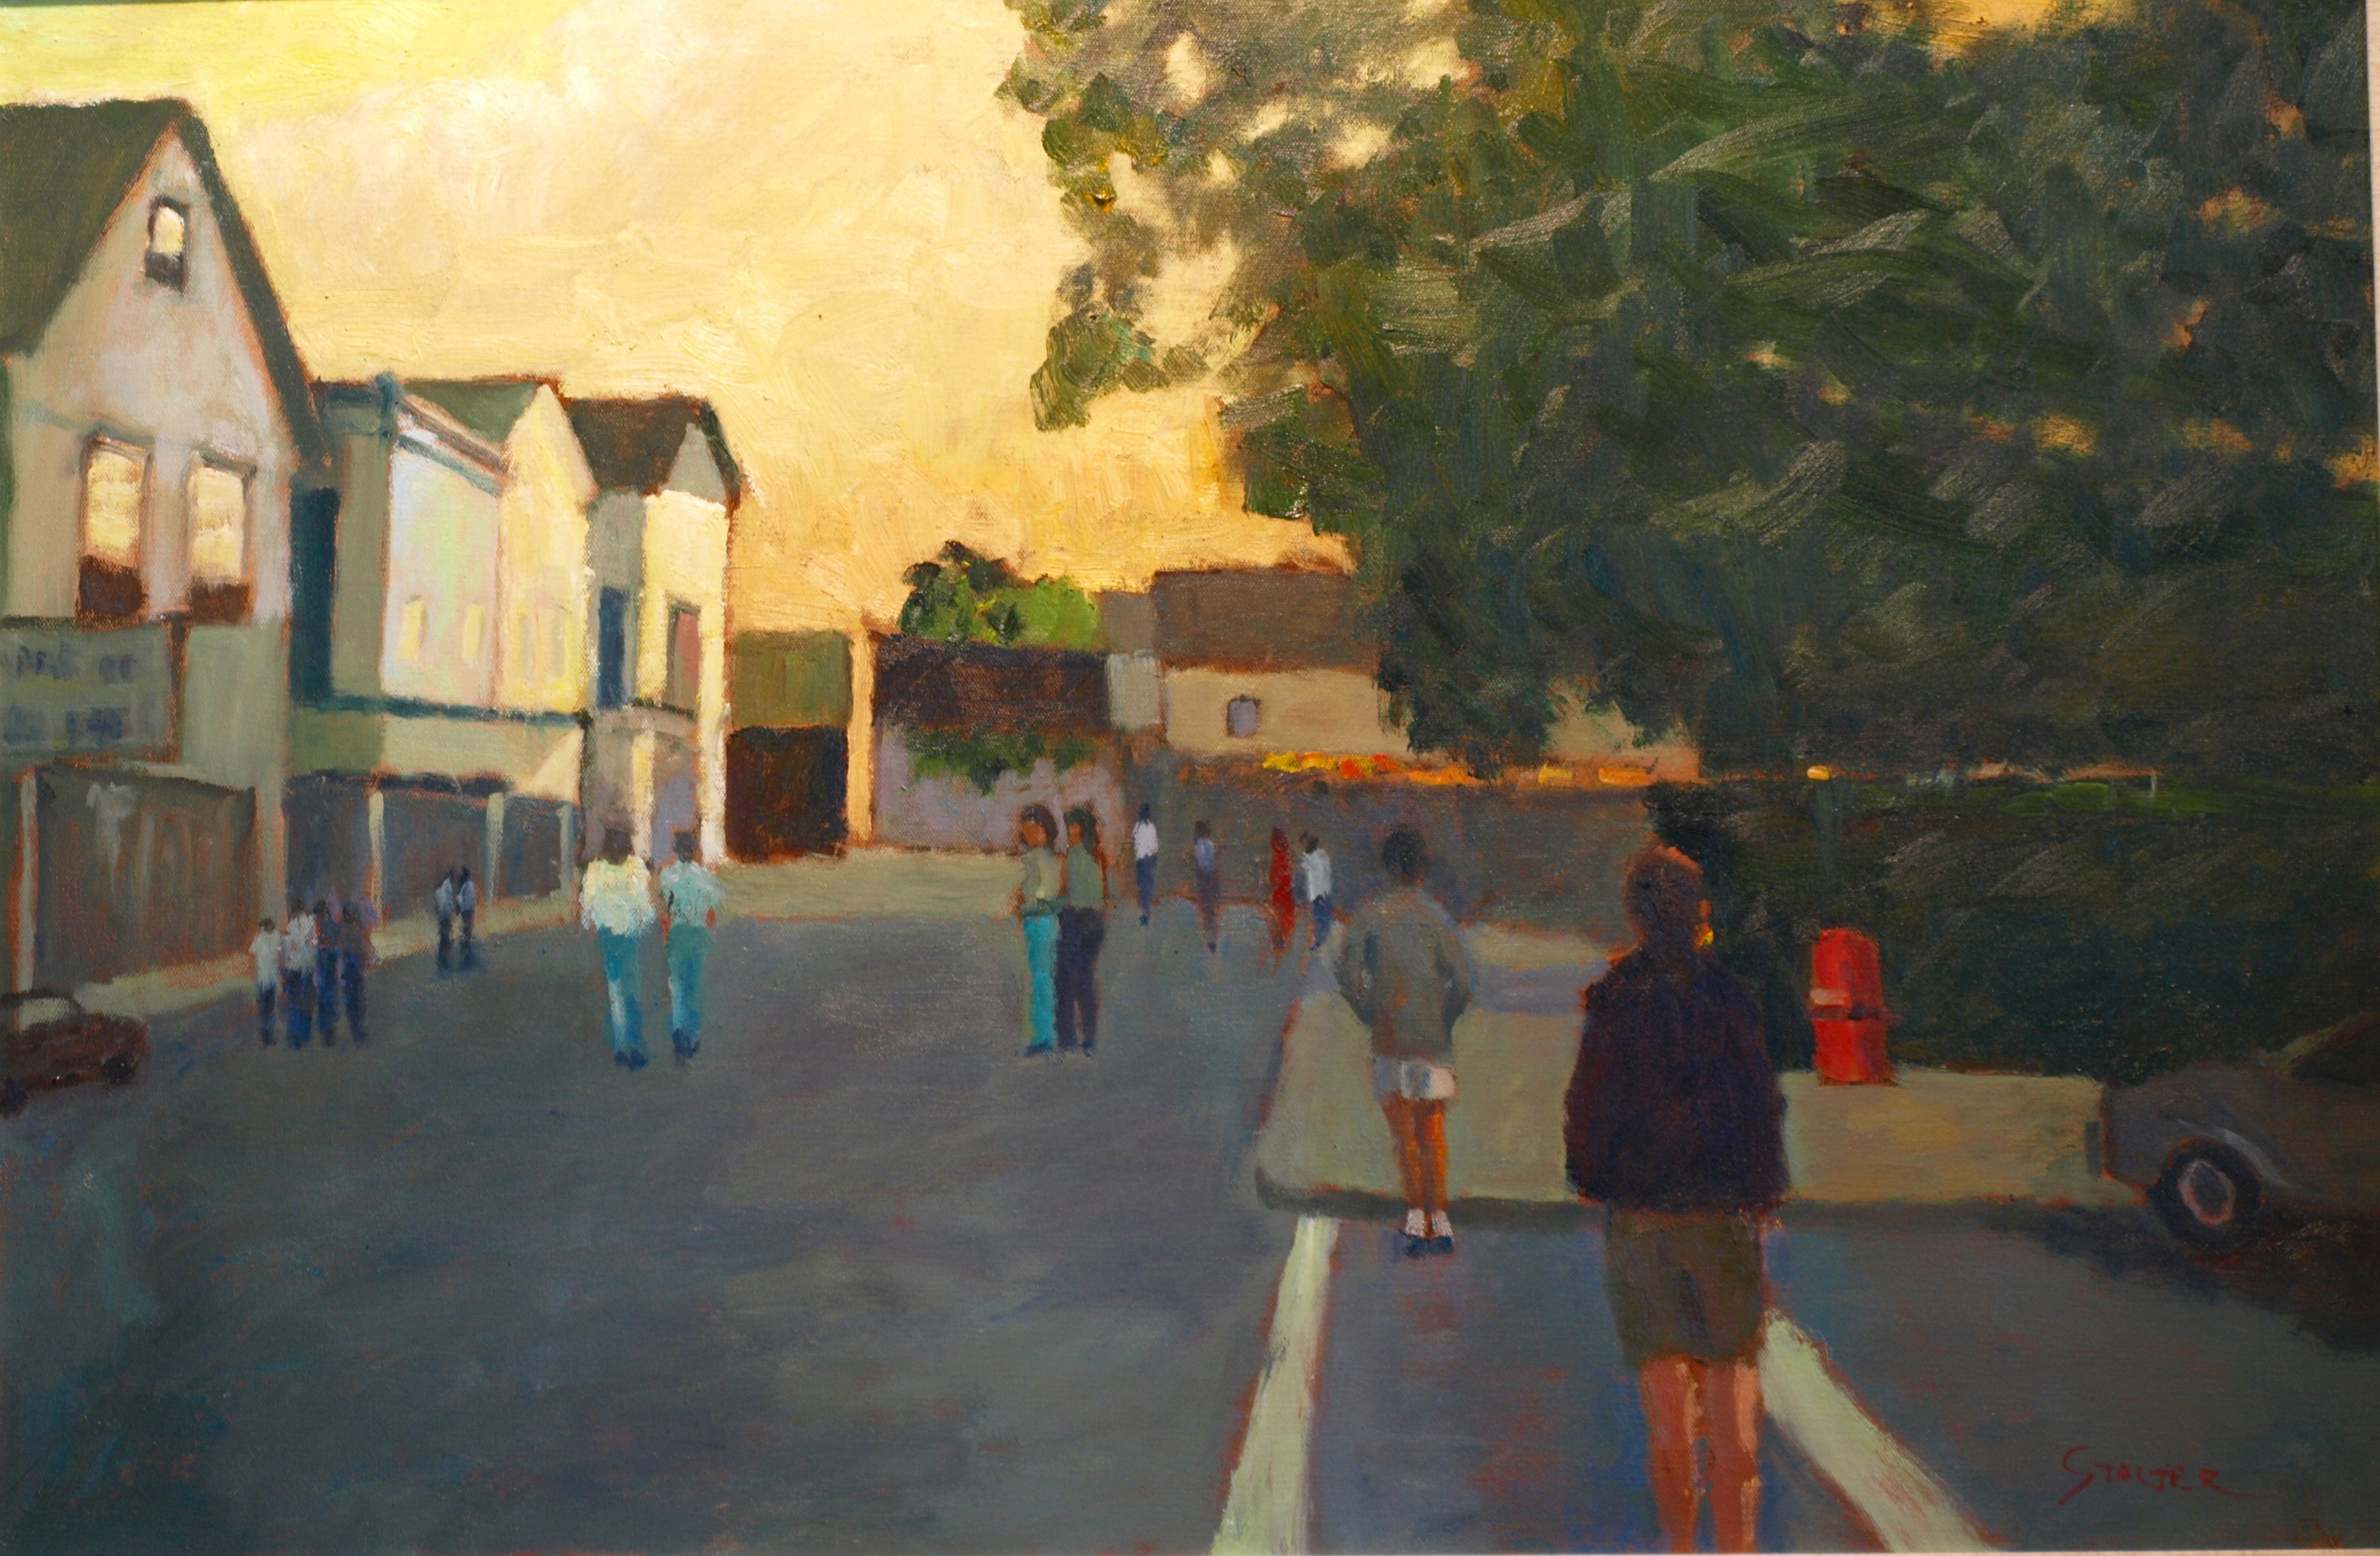 Commercial Street, Oil on Canvas, 24 x 36 Inches, by Richard Stalter, $1200